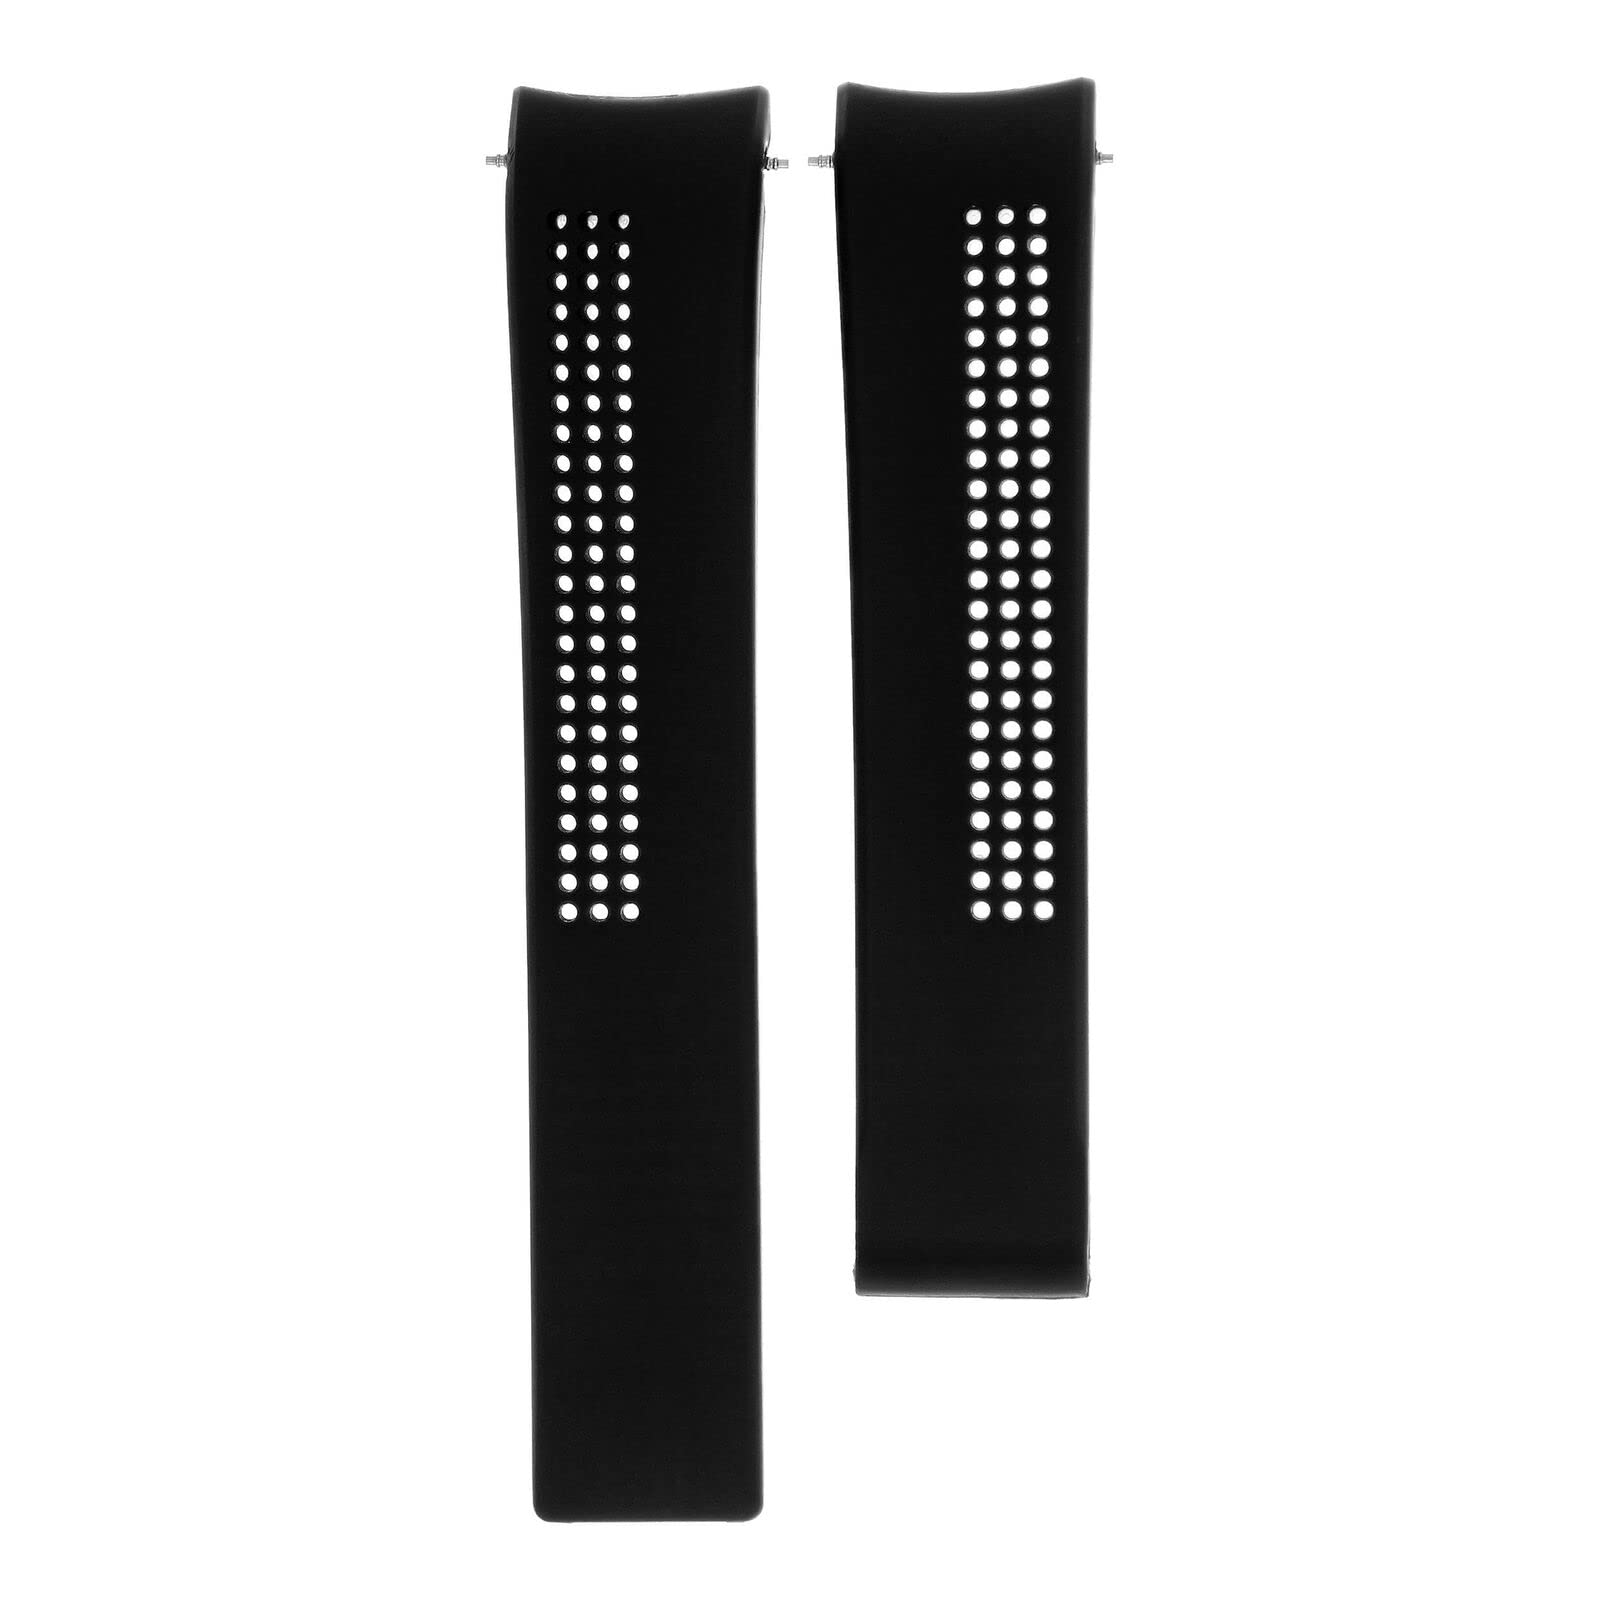 Ewatchparts 22MM RUBBER WATCH BAND STRAP COMPATIBLE WITH TAG HEUER CARRERA CALIBRE 1, 5, 16,17, 36 BLACK